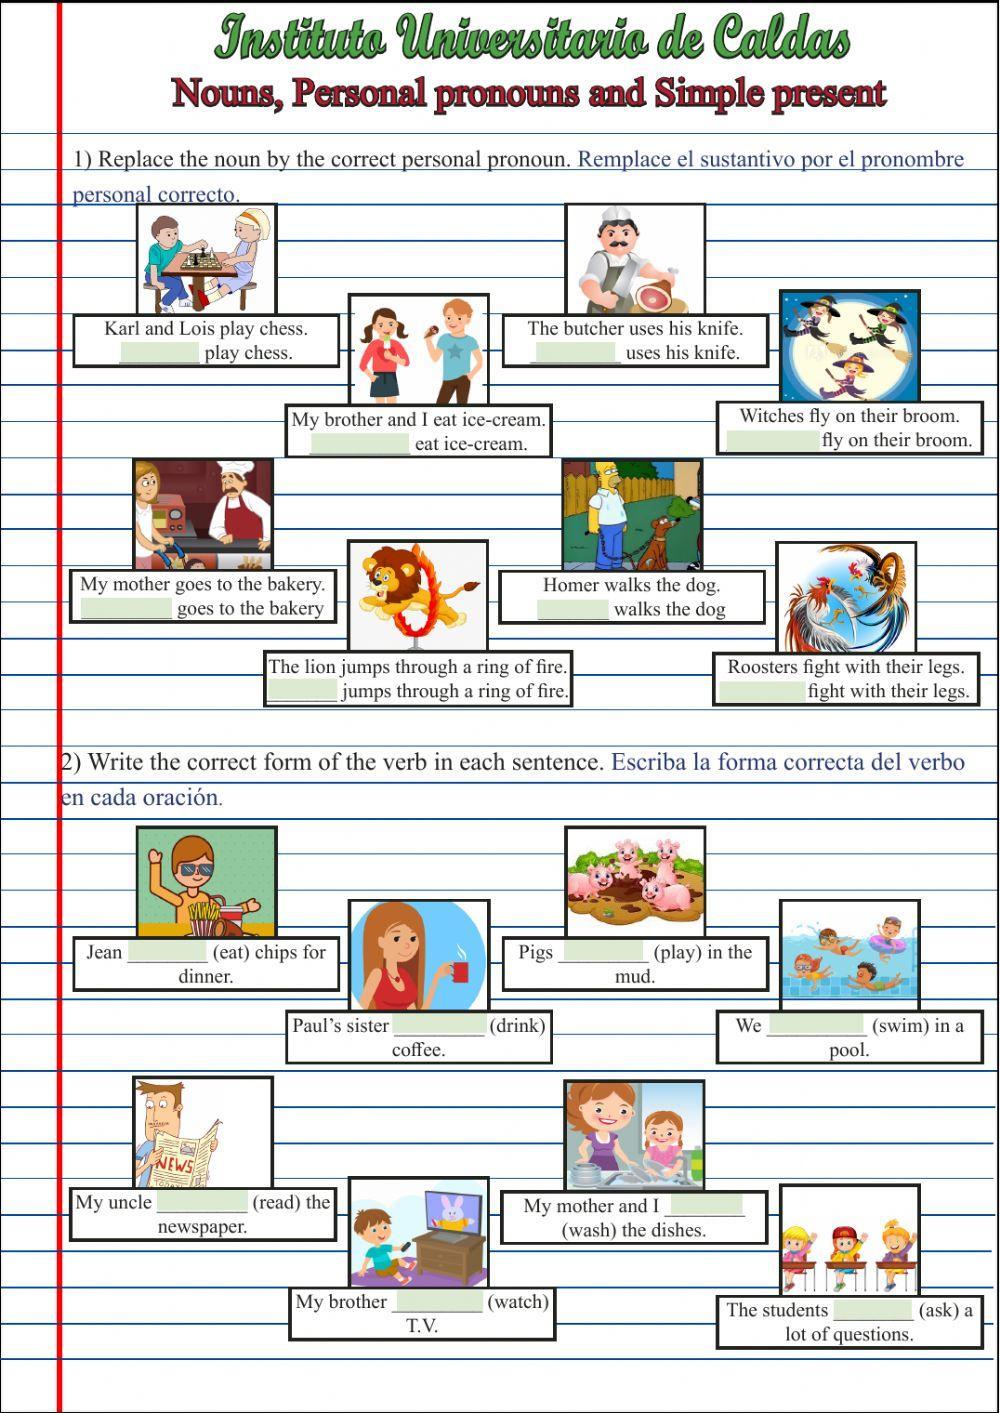 Simple present and Personal pronouns